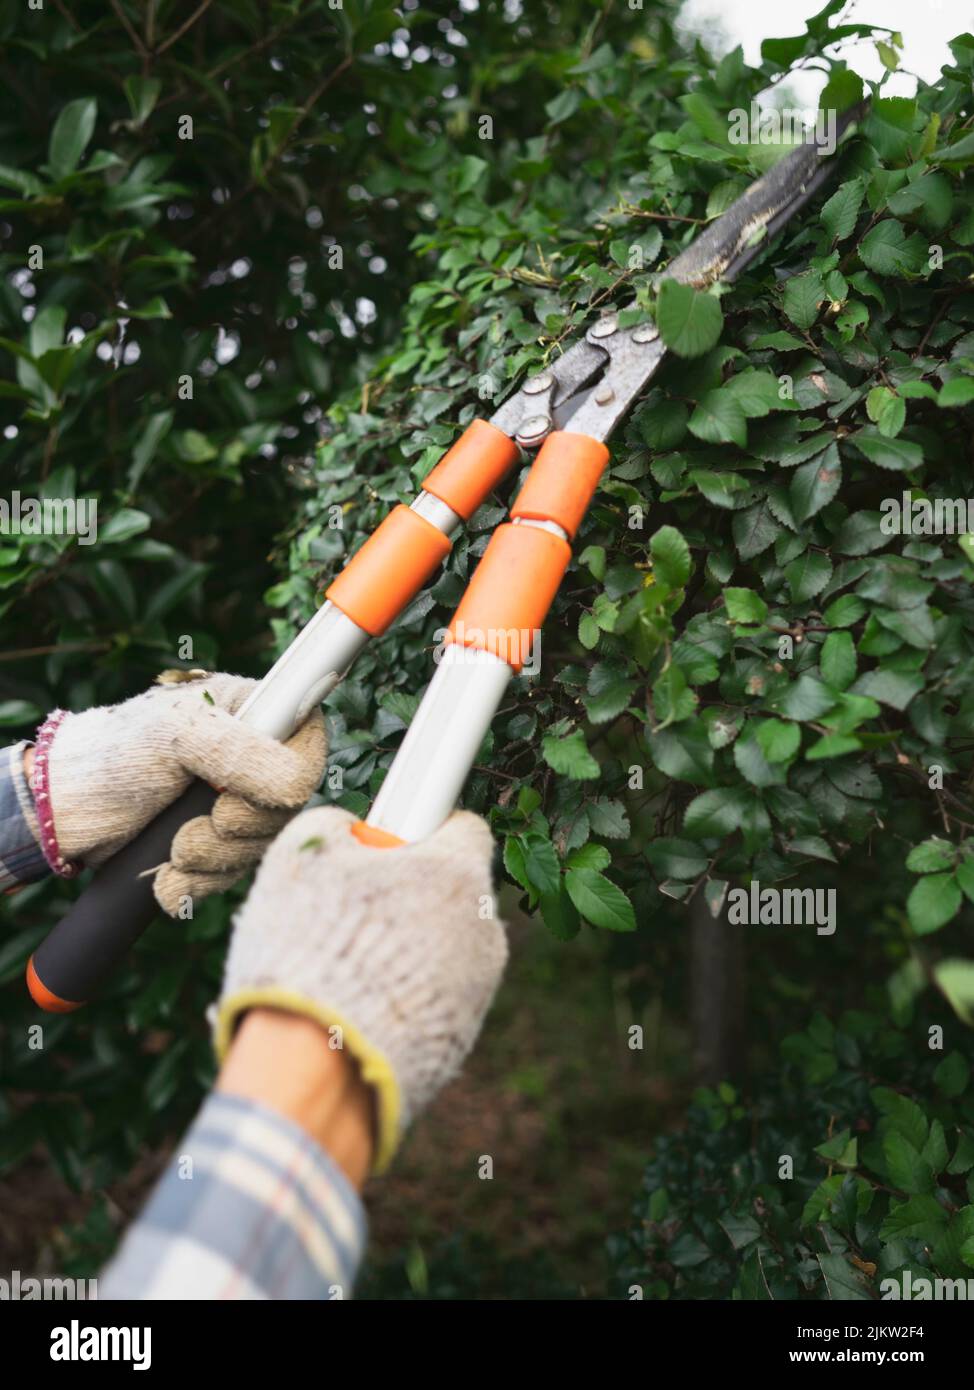 A vertical closeup shot of a person's hand pruning plants in a garden Stock Photo